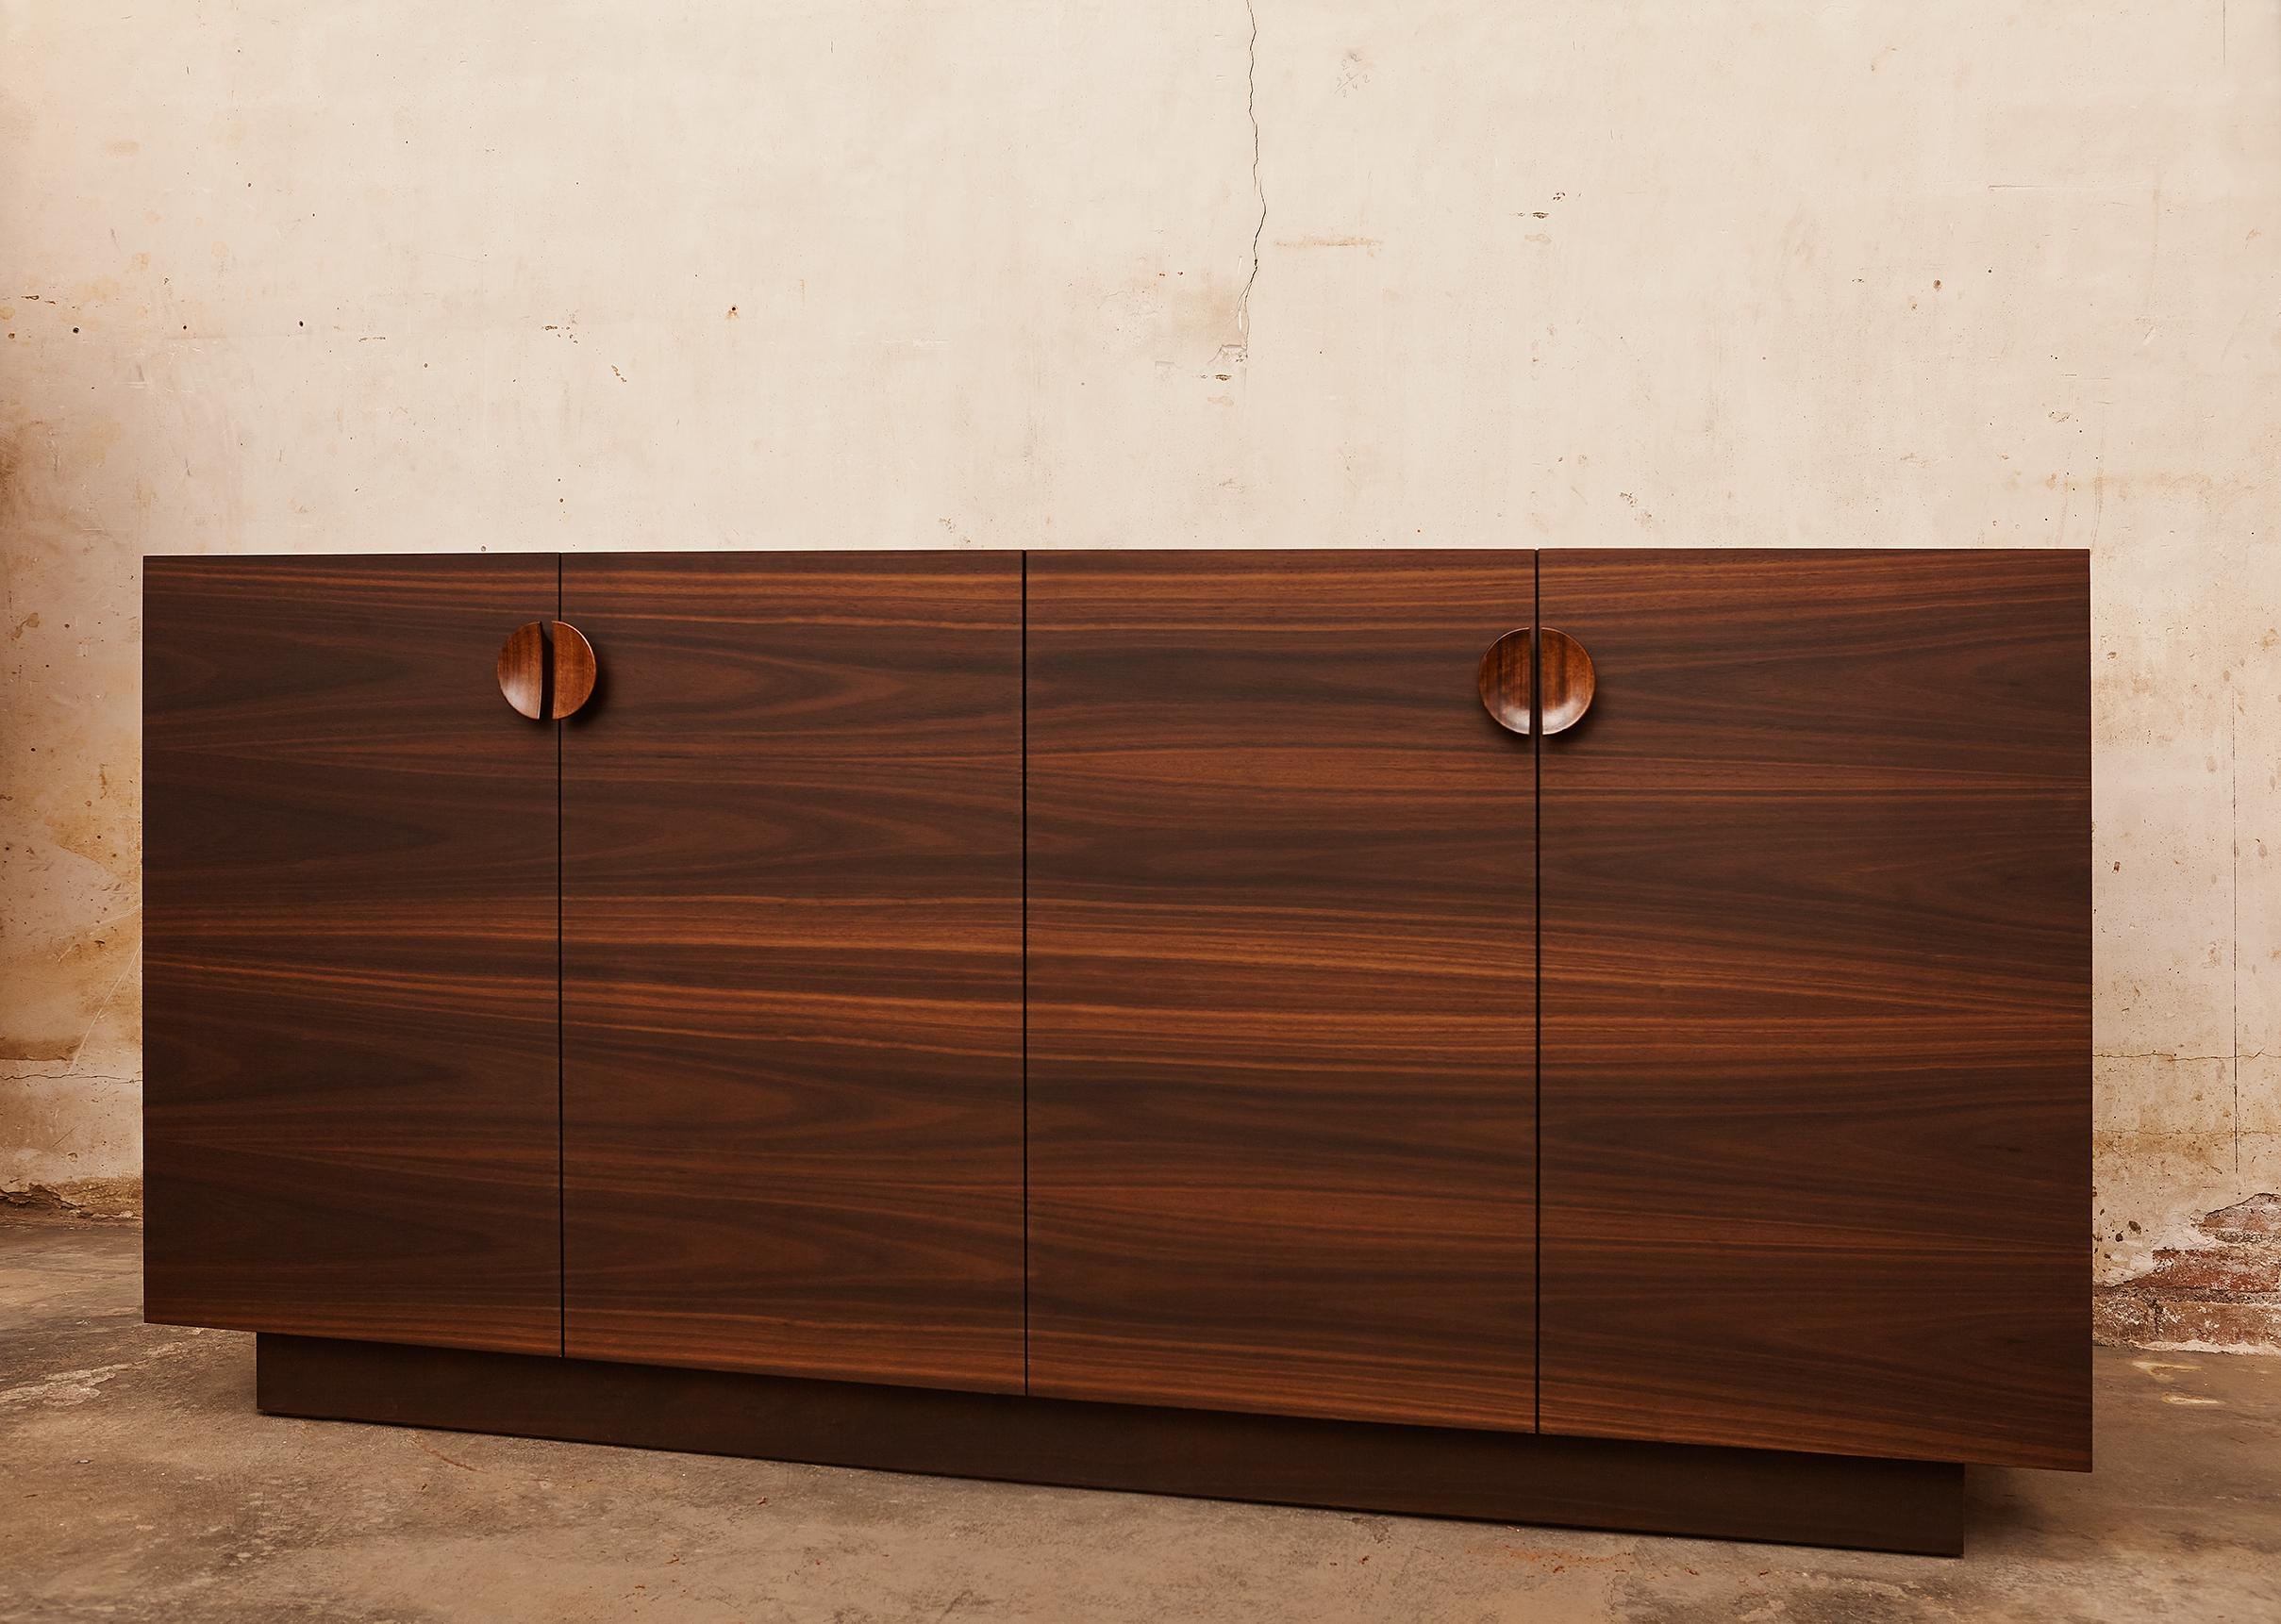 This Italian designed contemporary sideboard has 4 book matched eucalyptus wood doors with ample storage which can be customized. The doors featured turned wood pulls. 

The inside was finished with contrasting Brazilian etimoe wood shelving. The